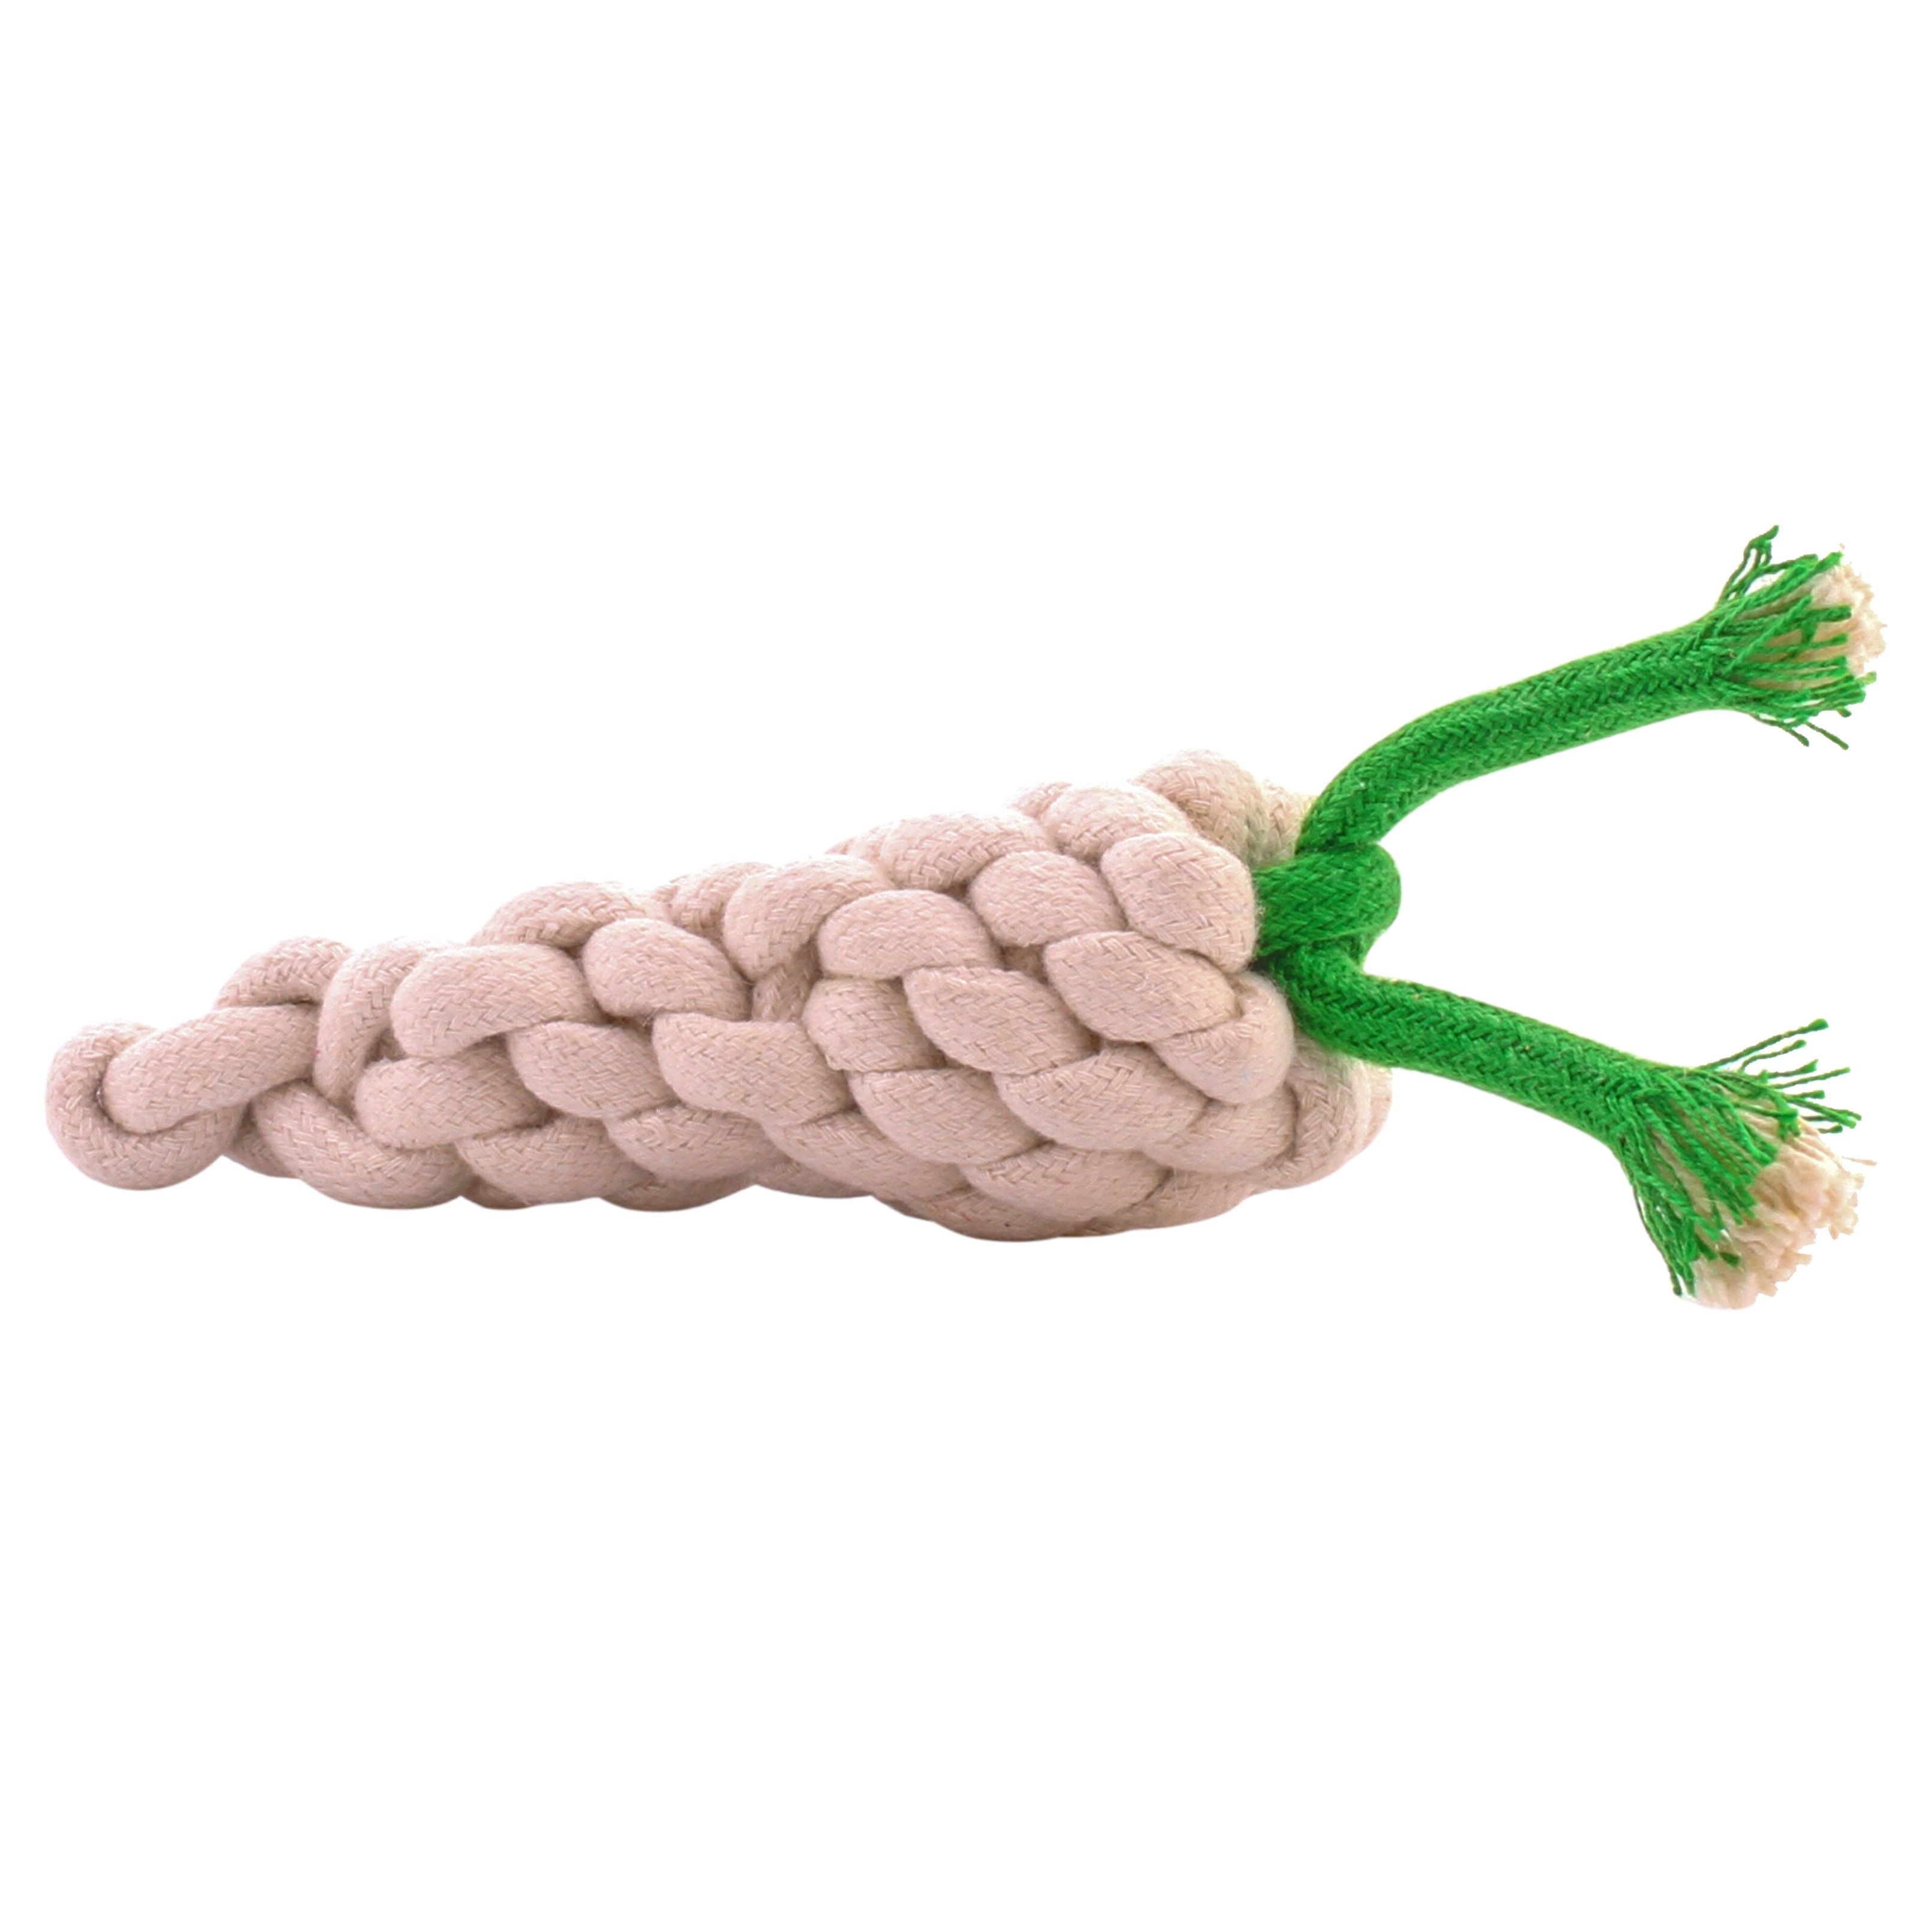 Carrot Tug Rope Interactive Dog Toy